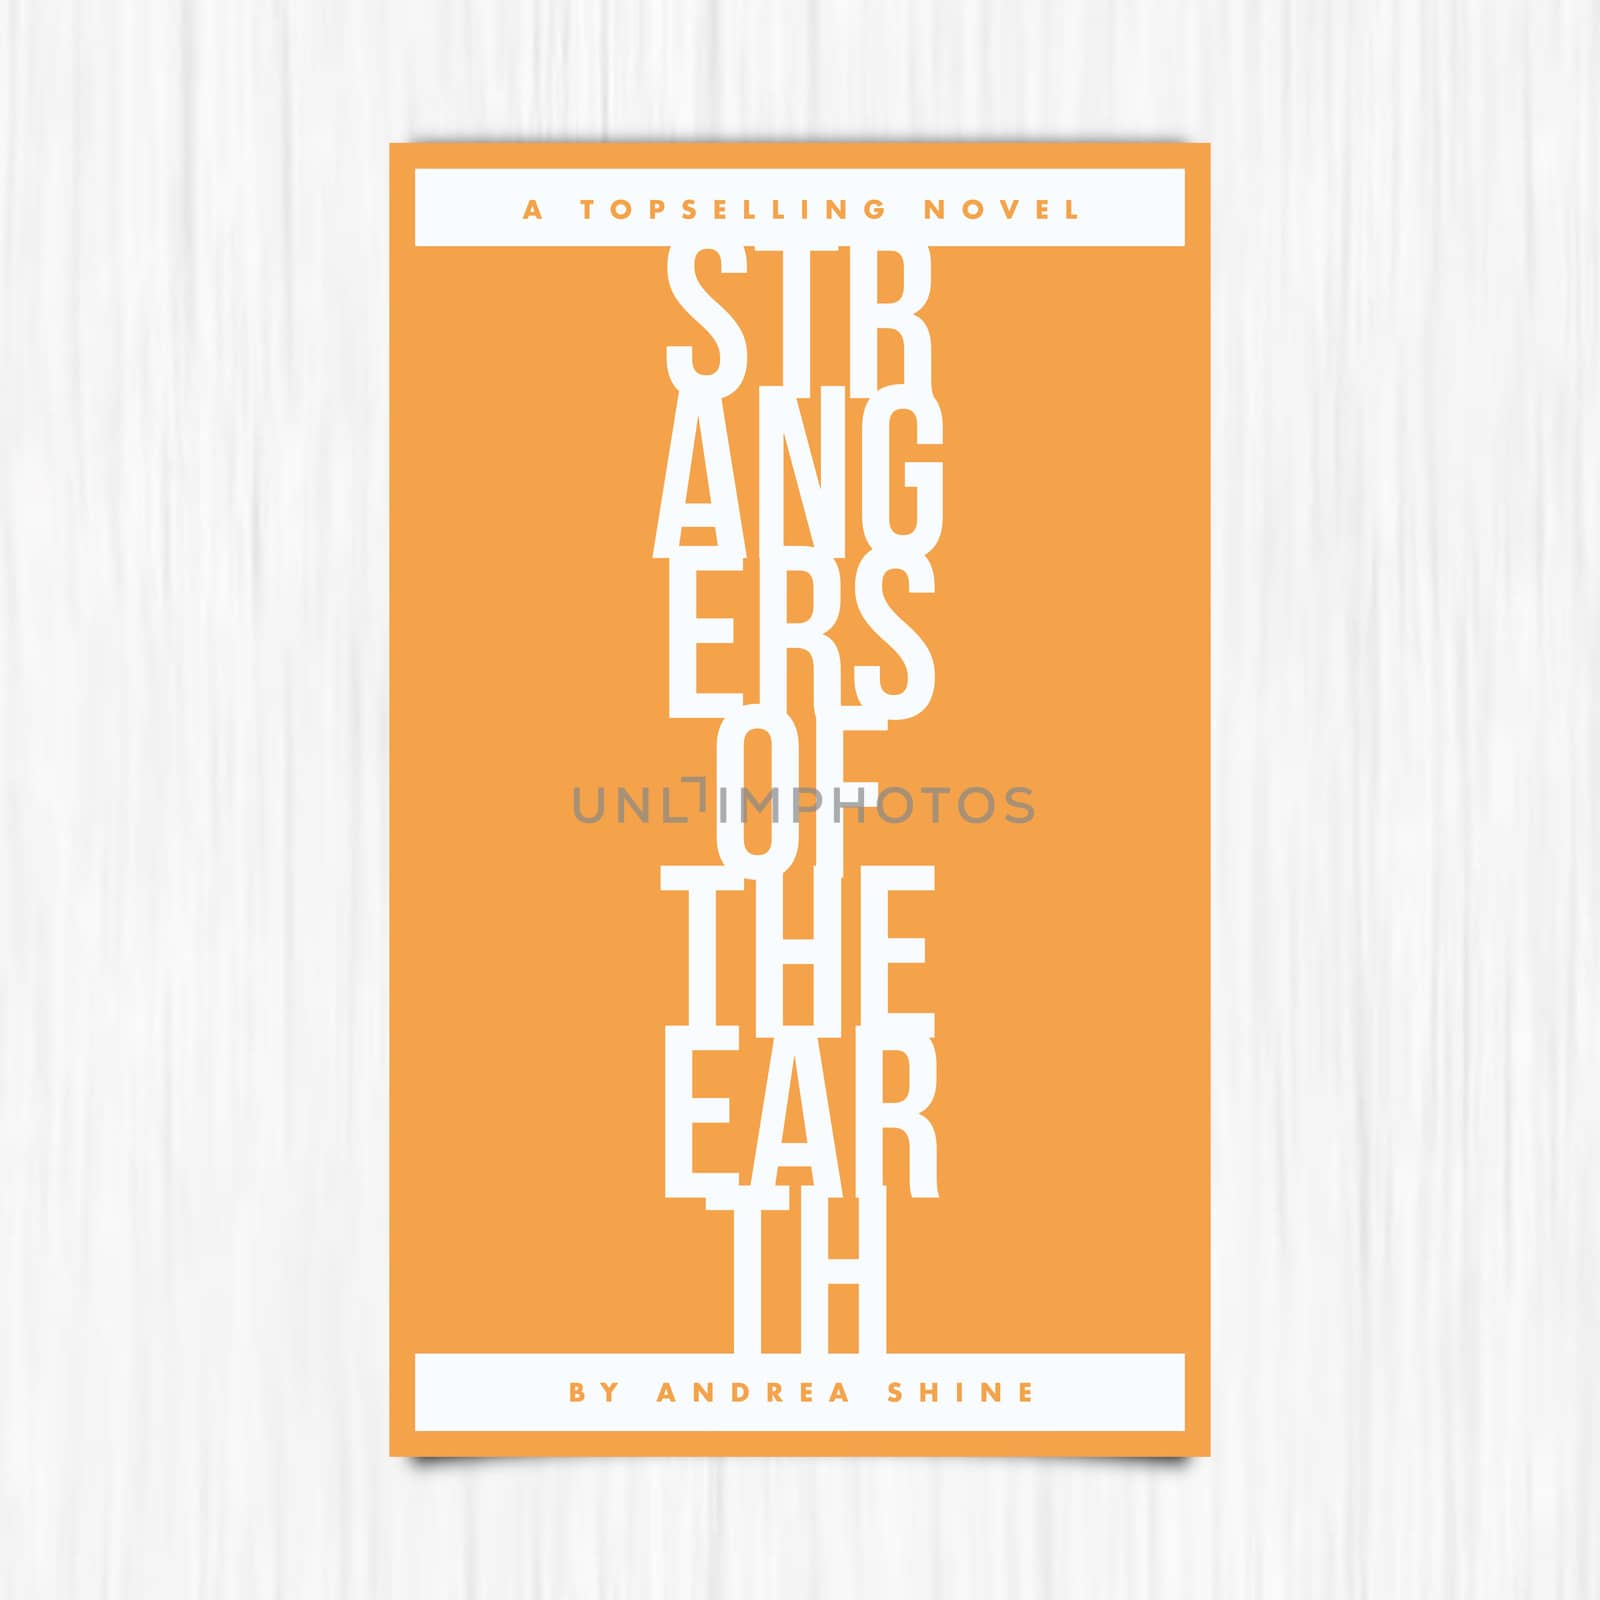 Vector of novel cover with strangers of the earth text against white background